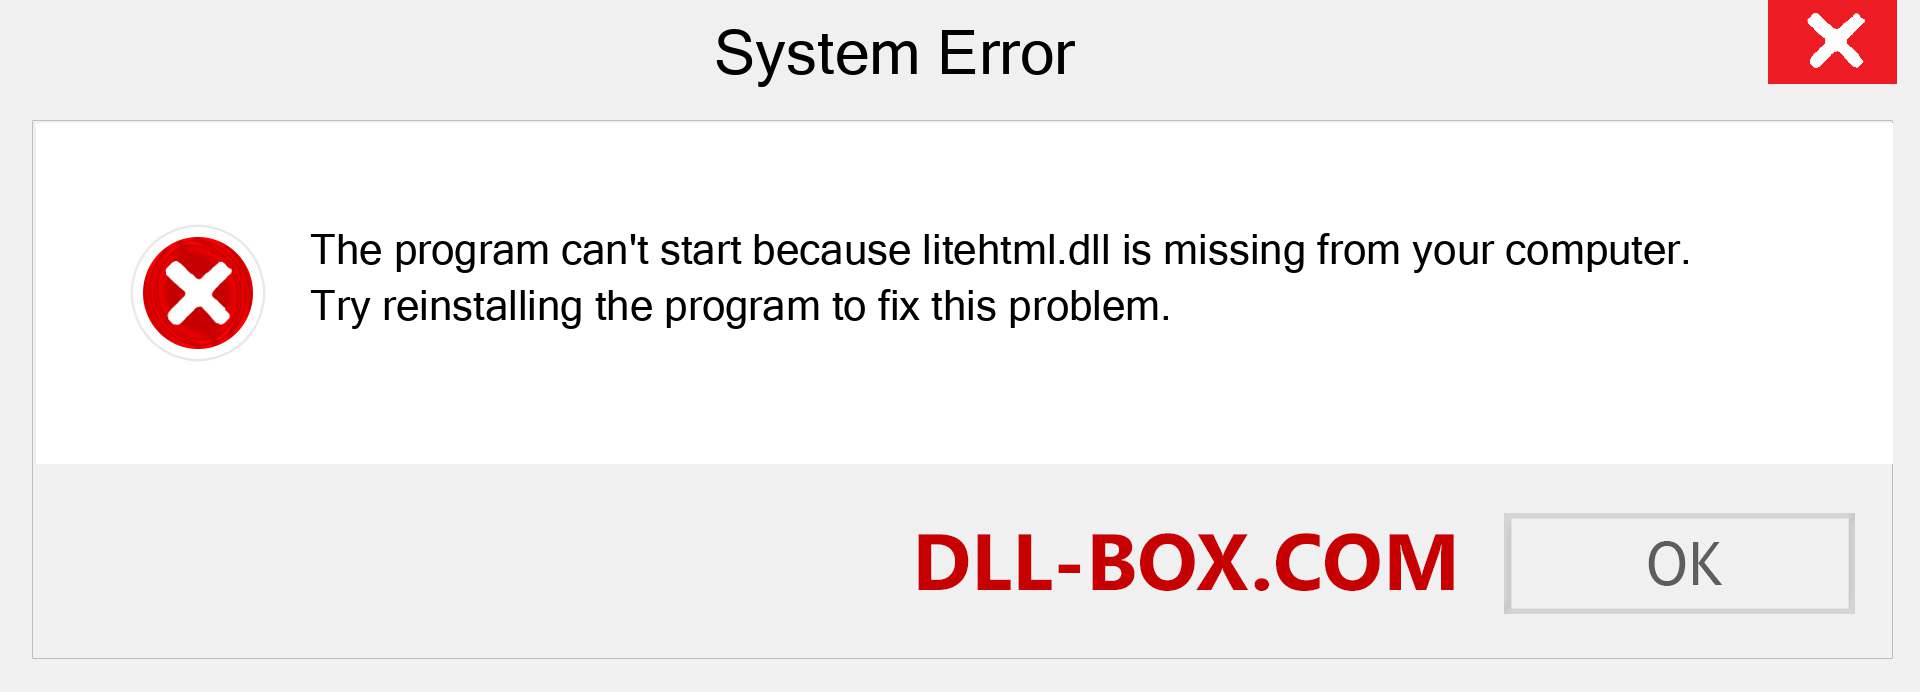  litehtml.dll file is missing?. Download for Windows 7, 8, 10 - Fix  litehtml dll Missing Error on Windows, photos, images